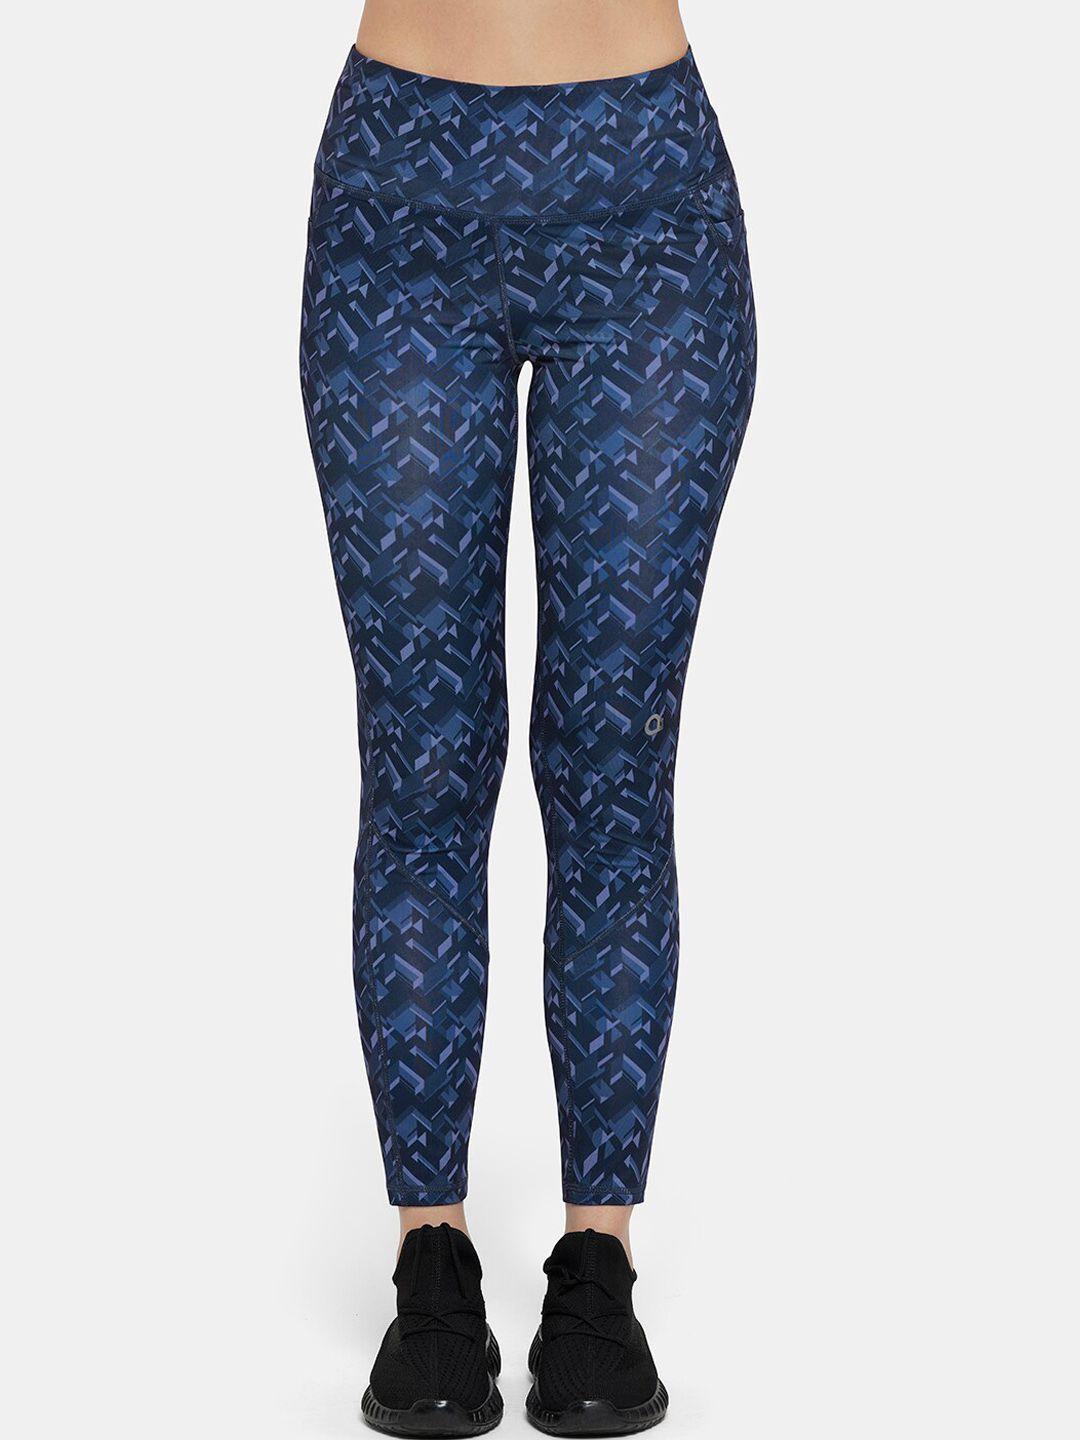 amante-women-blue-printed-slim-fit-ankle-length-training-tights